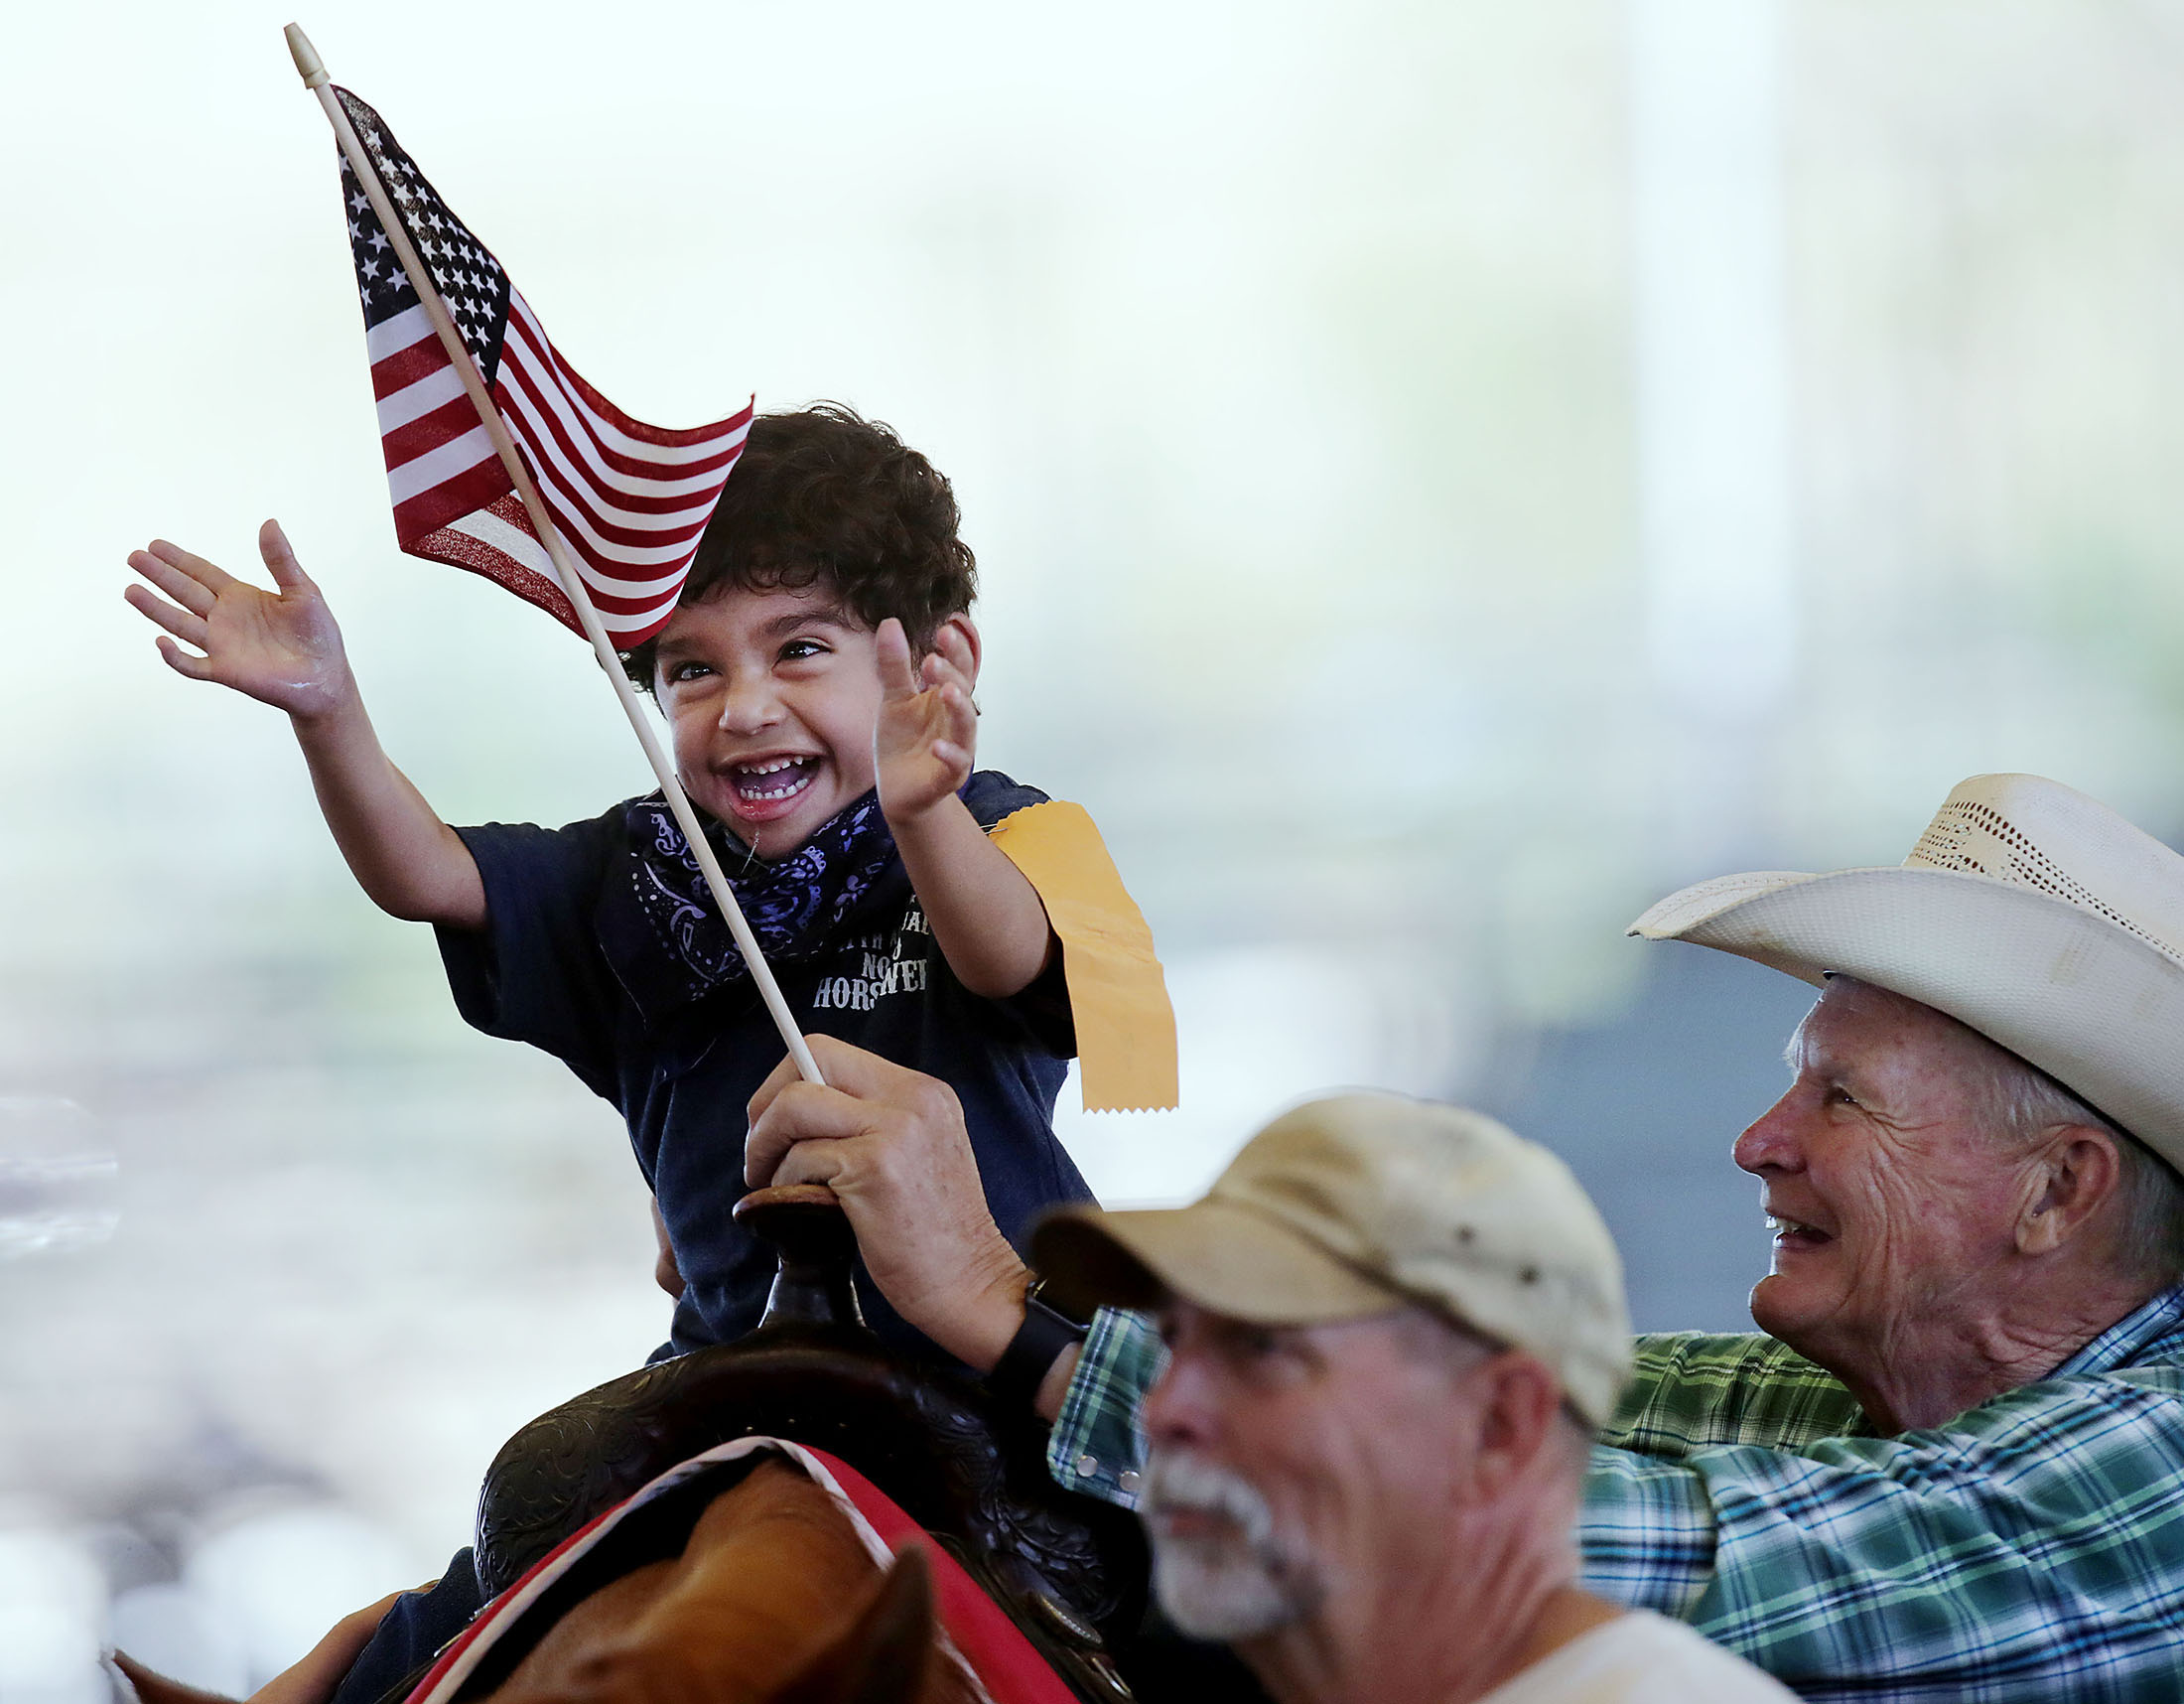  Giovanny Lizardi, 5, of San Bernardino enjoys a ride on a real horse as he reaches for a flag as he enjoys Challenged Children's Rodeo for special needs kids at Ingalls Park in Norco, CA. Sunday, Apr. 23, 2017. 
 